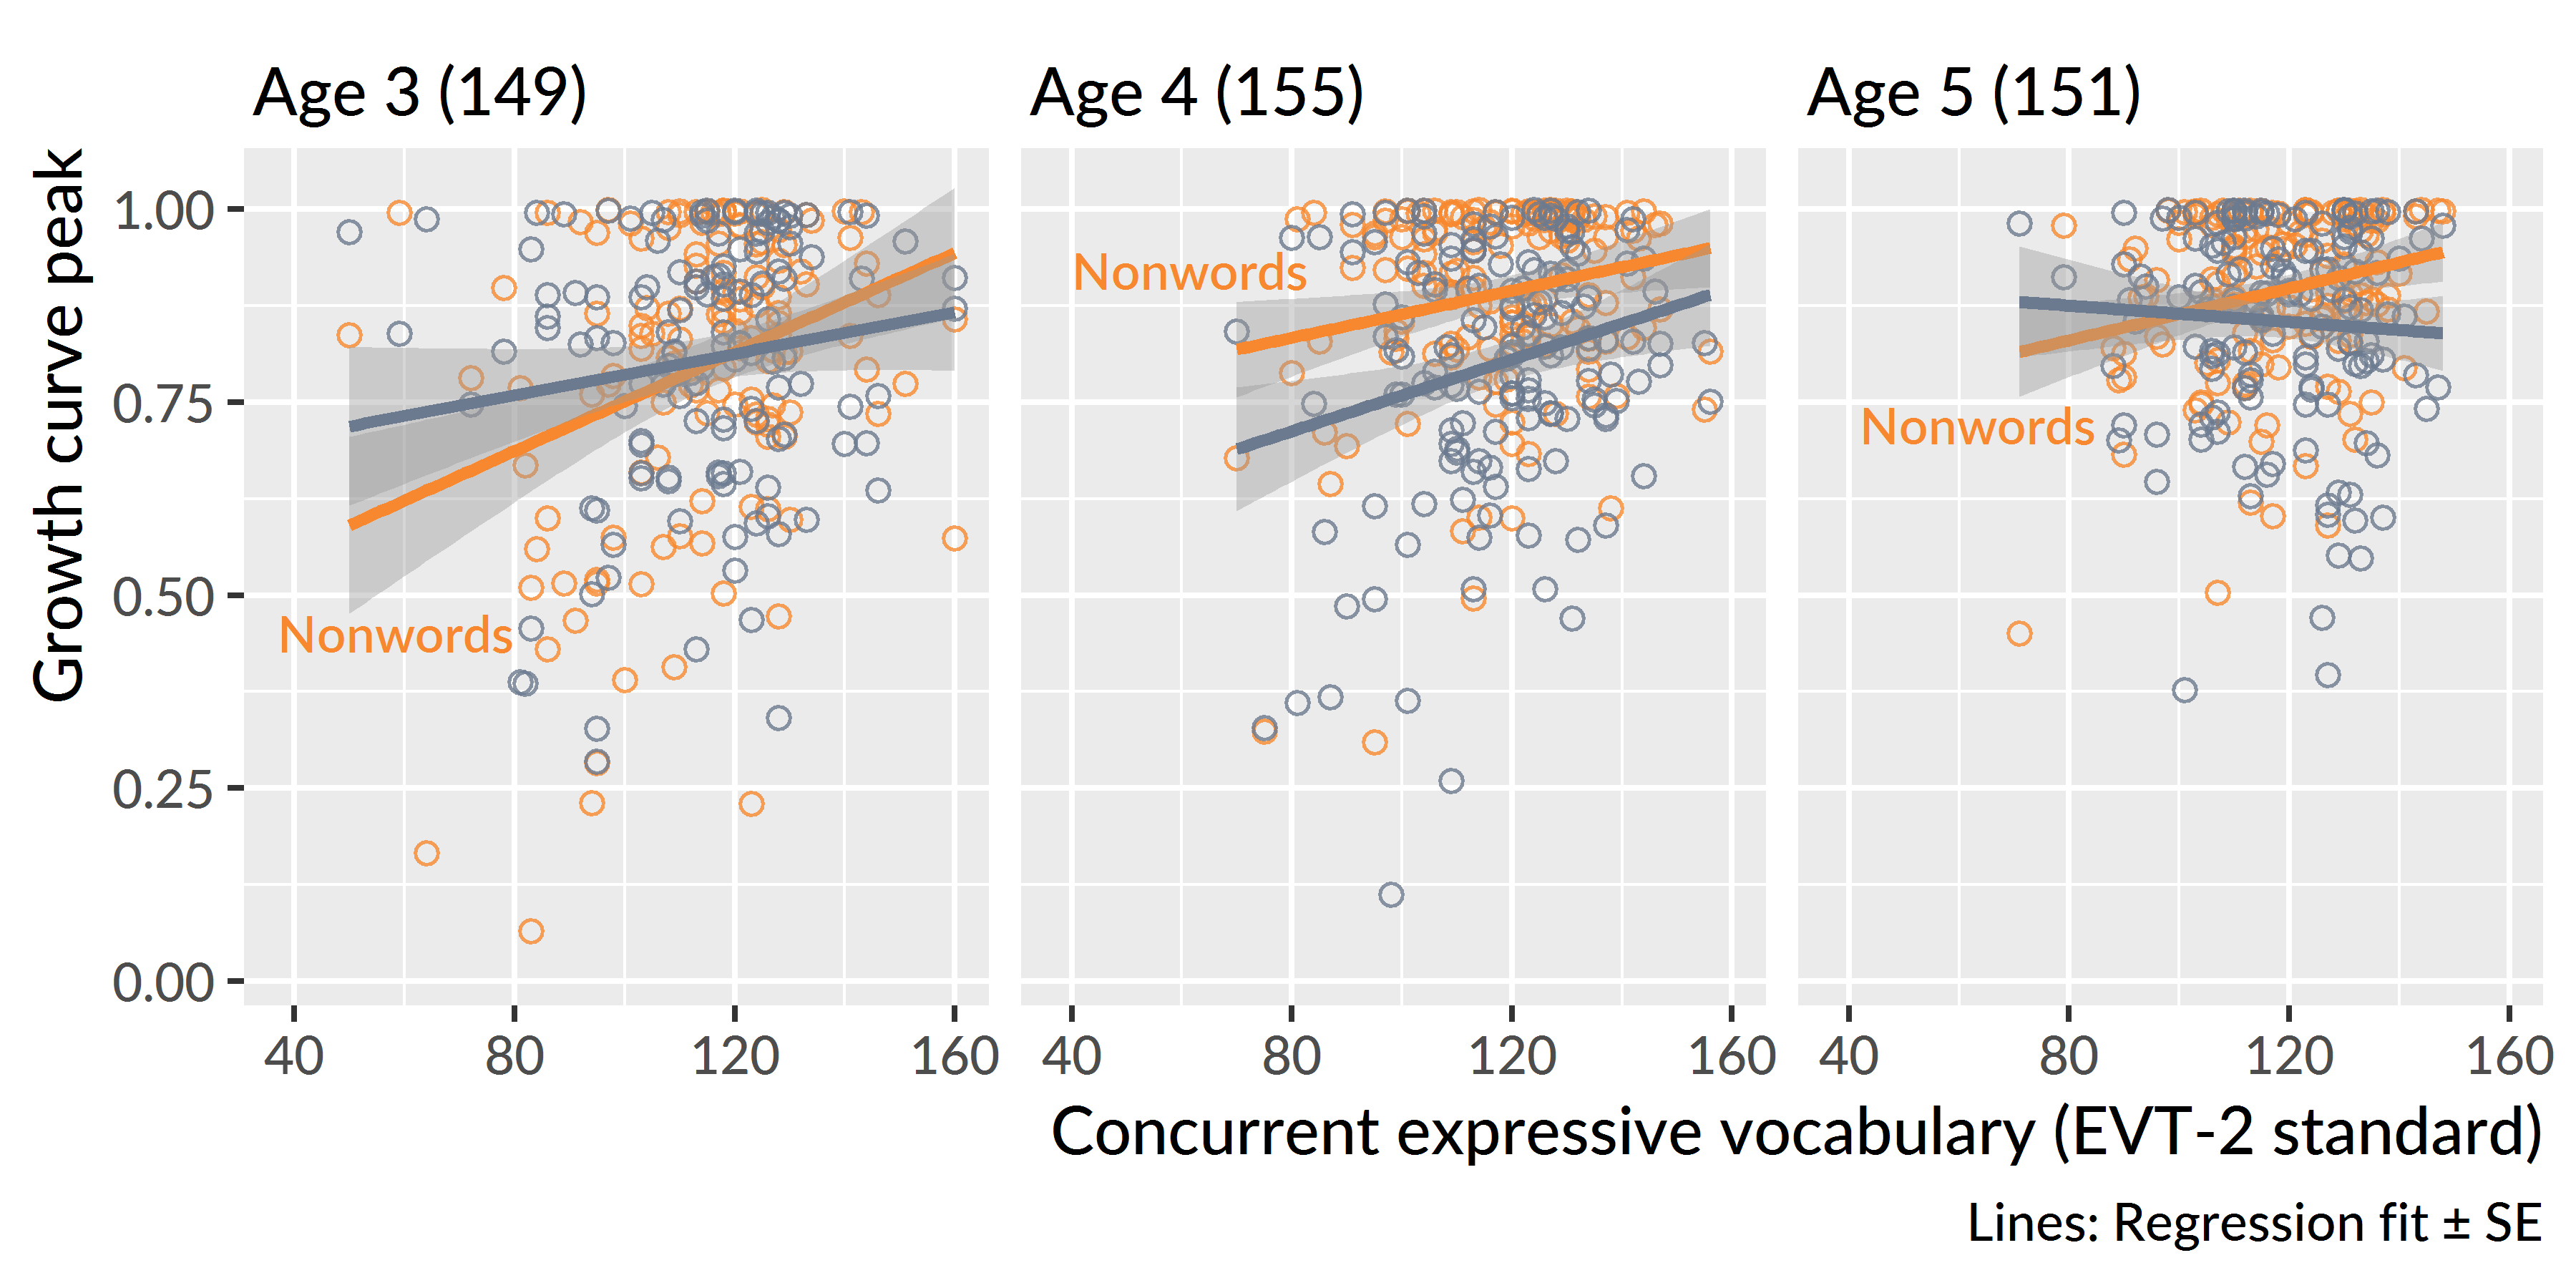 Relationships between expressive vocabulary and growth curve peaks at each age.